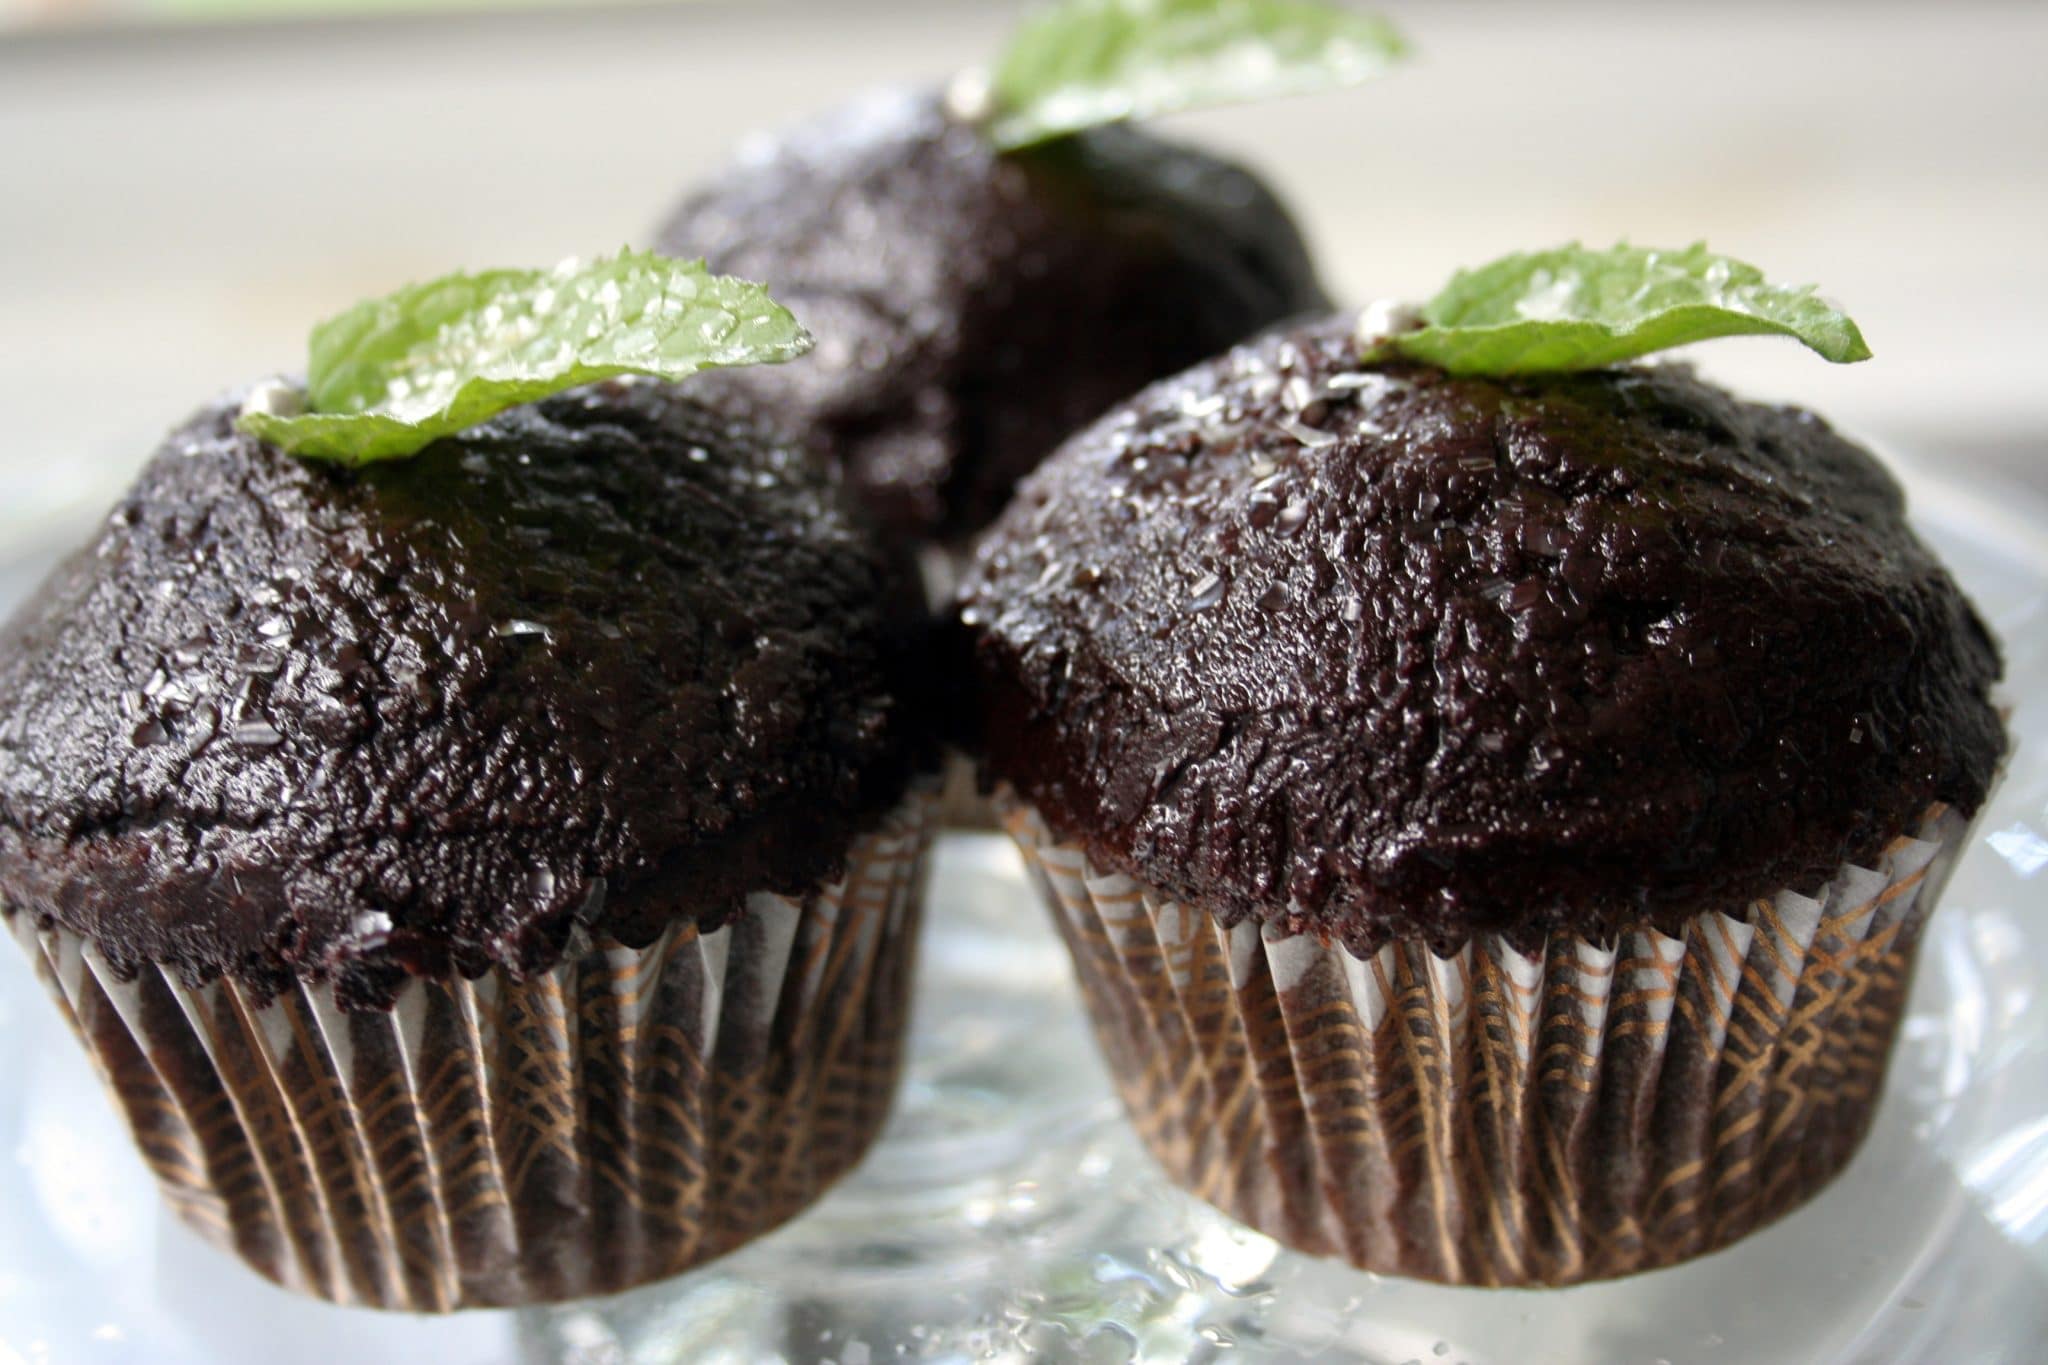 Close up of 3 Chocolate Thin Mint Cupcakes with a fresh mint leaf garnish